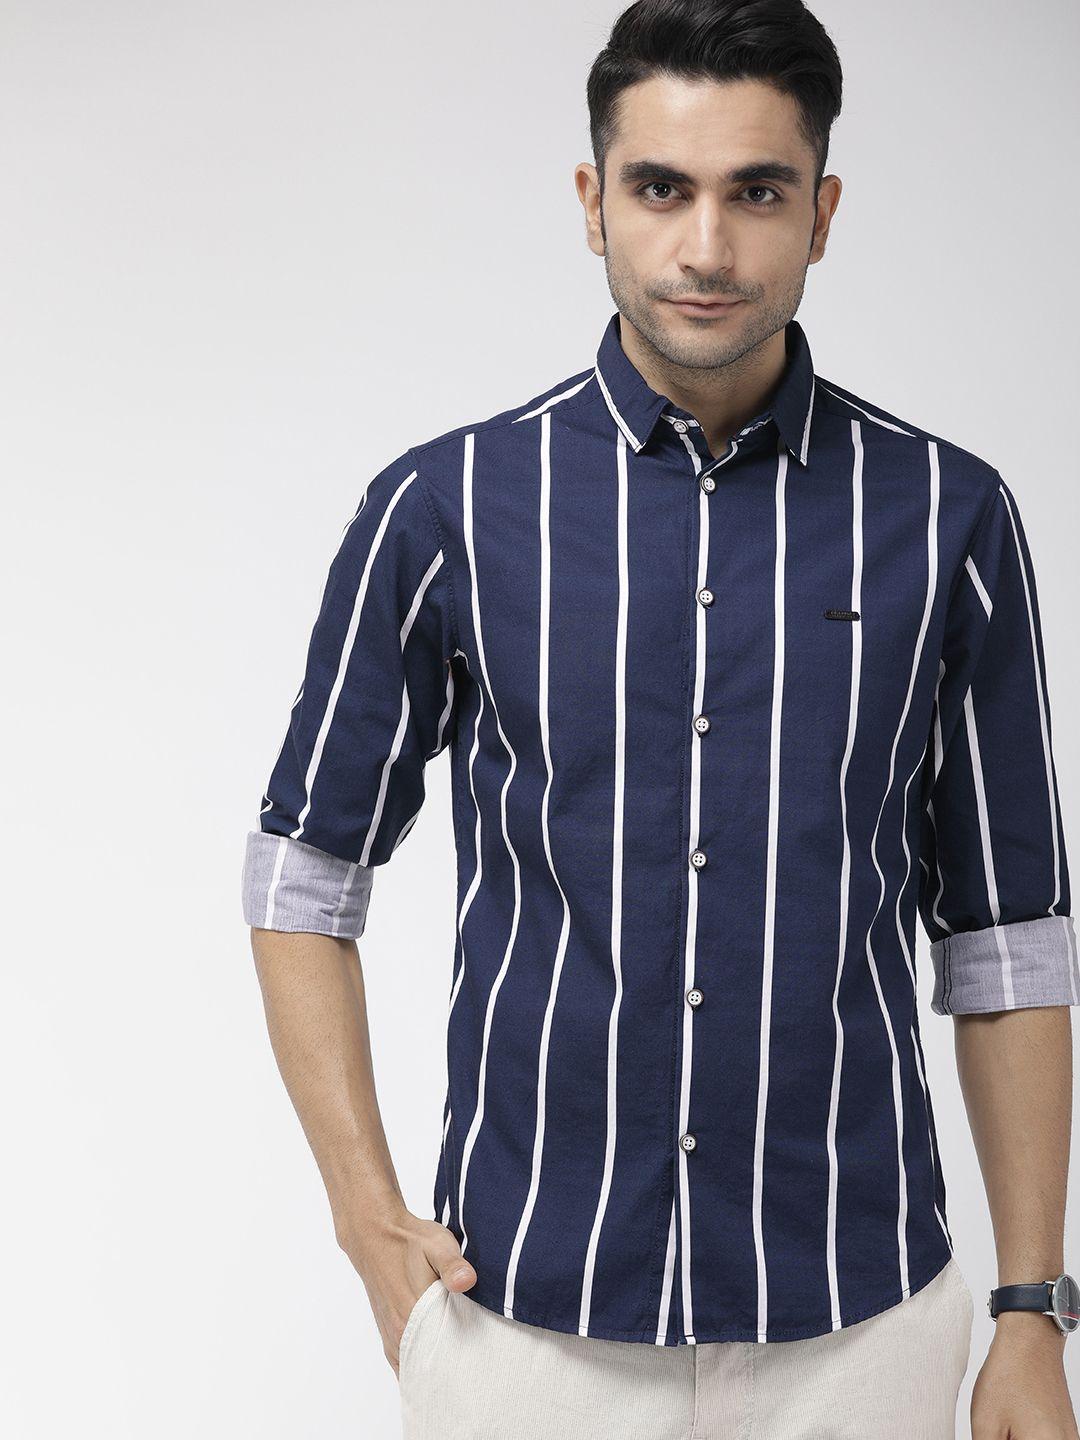 the indian garage co men navy blue & white slim fit striped casual shirt